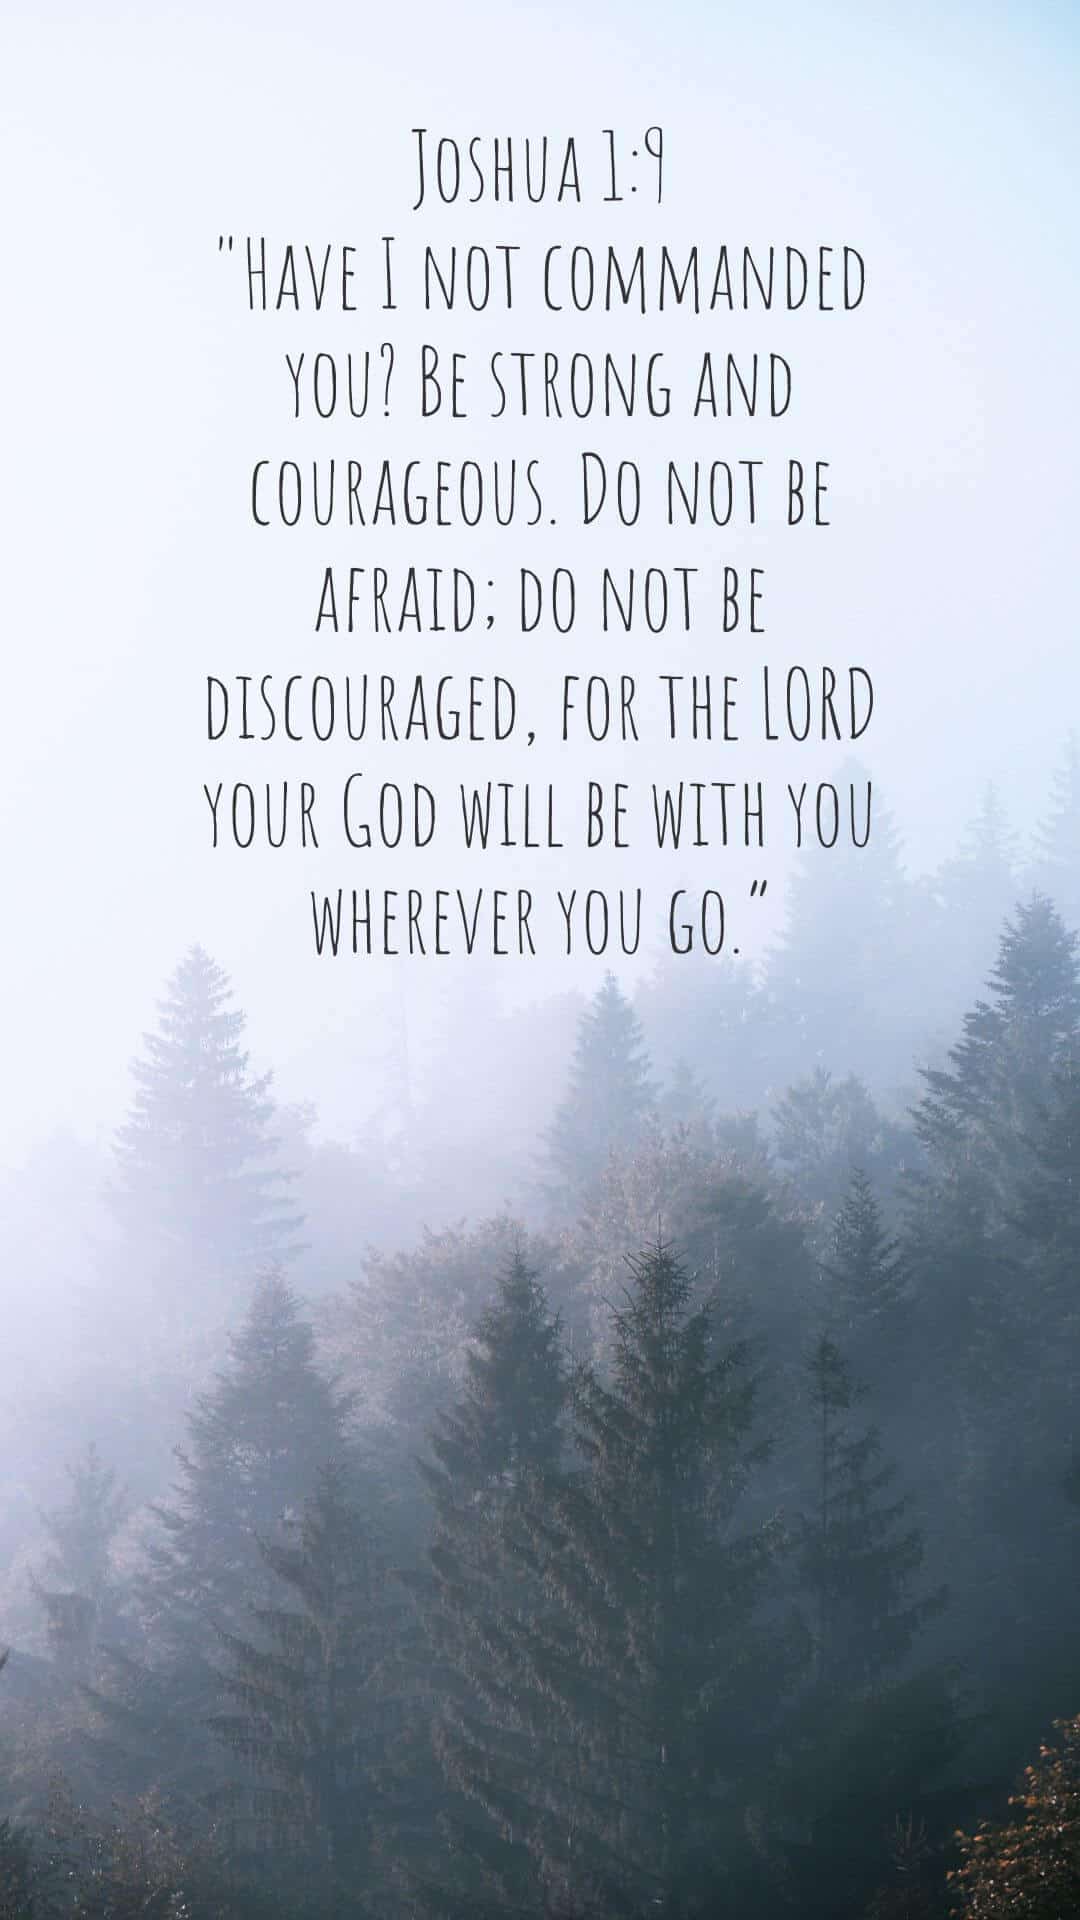 Joshua 1:9: "Have I not commanded you? Be strong and courageous. Do not be afraid; do not be discouraged, for the LORD your God will be with you wherever you go.”